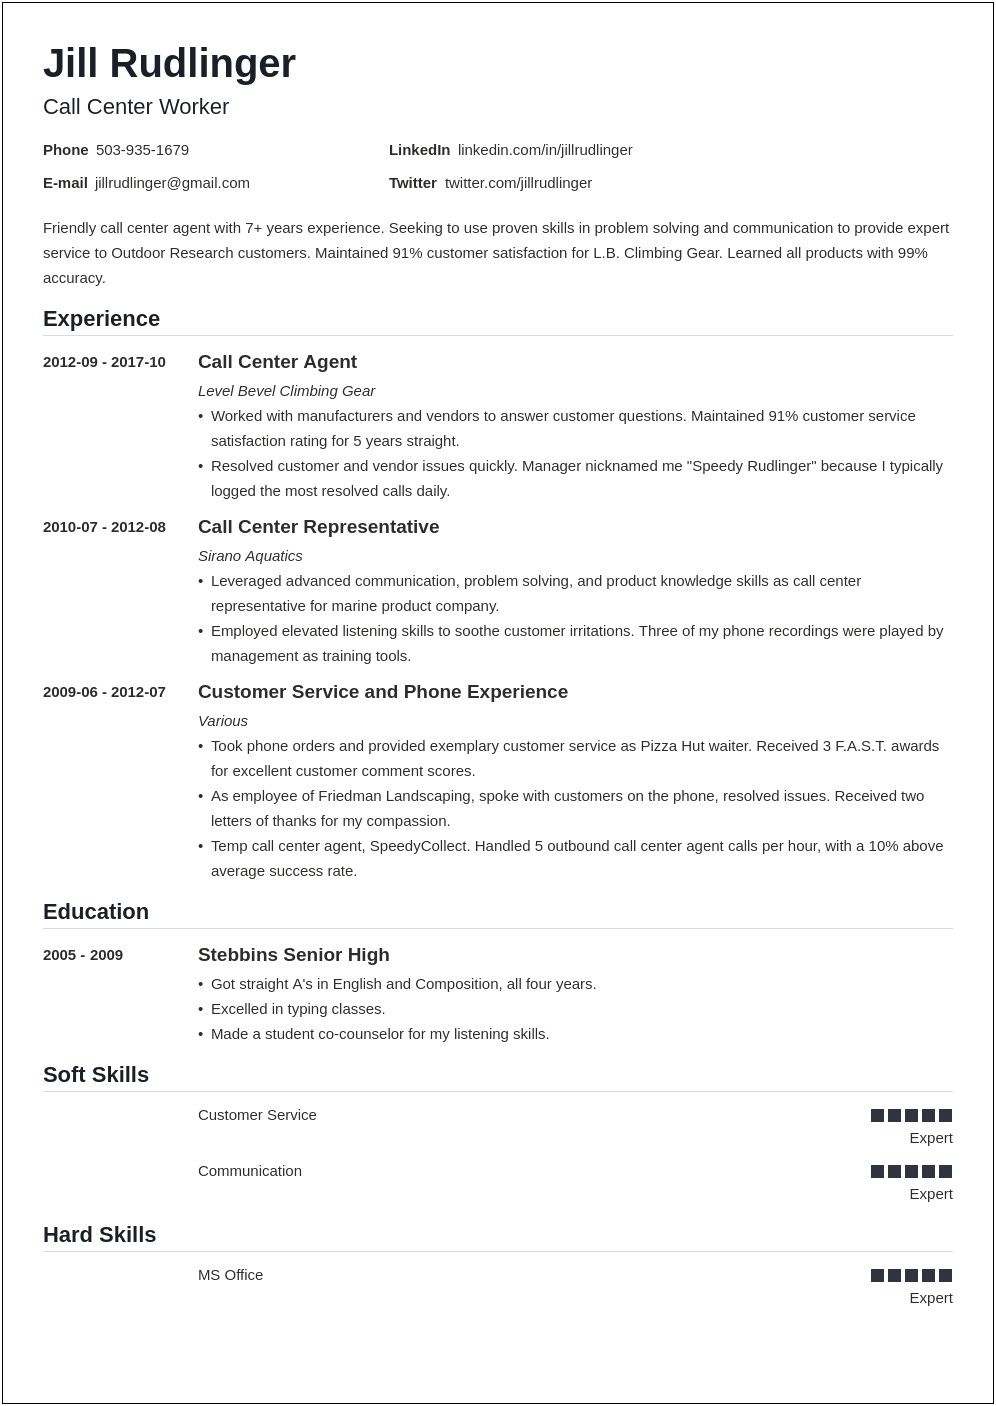 Exceptional Resume Summary Call Center Team Lead